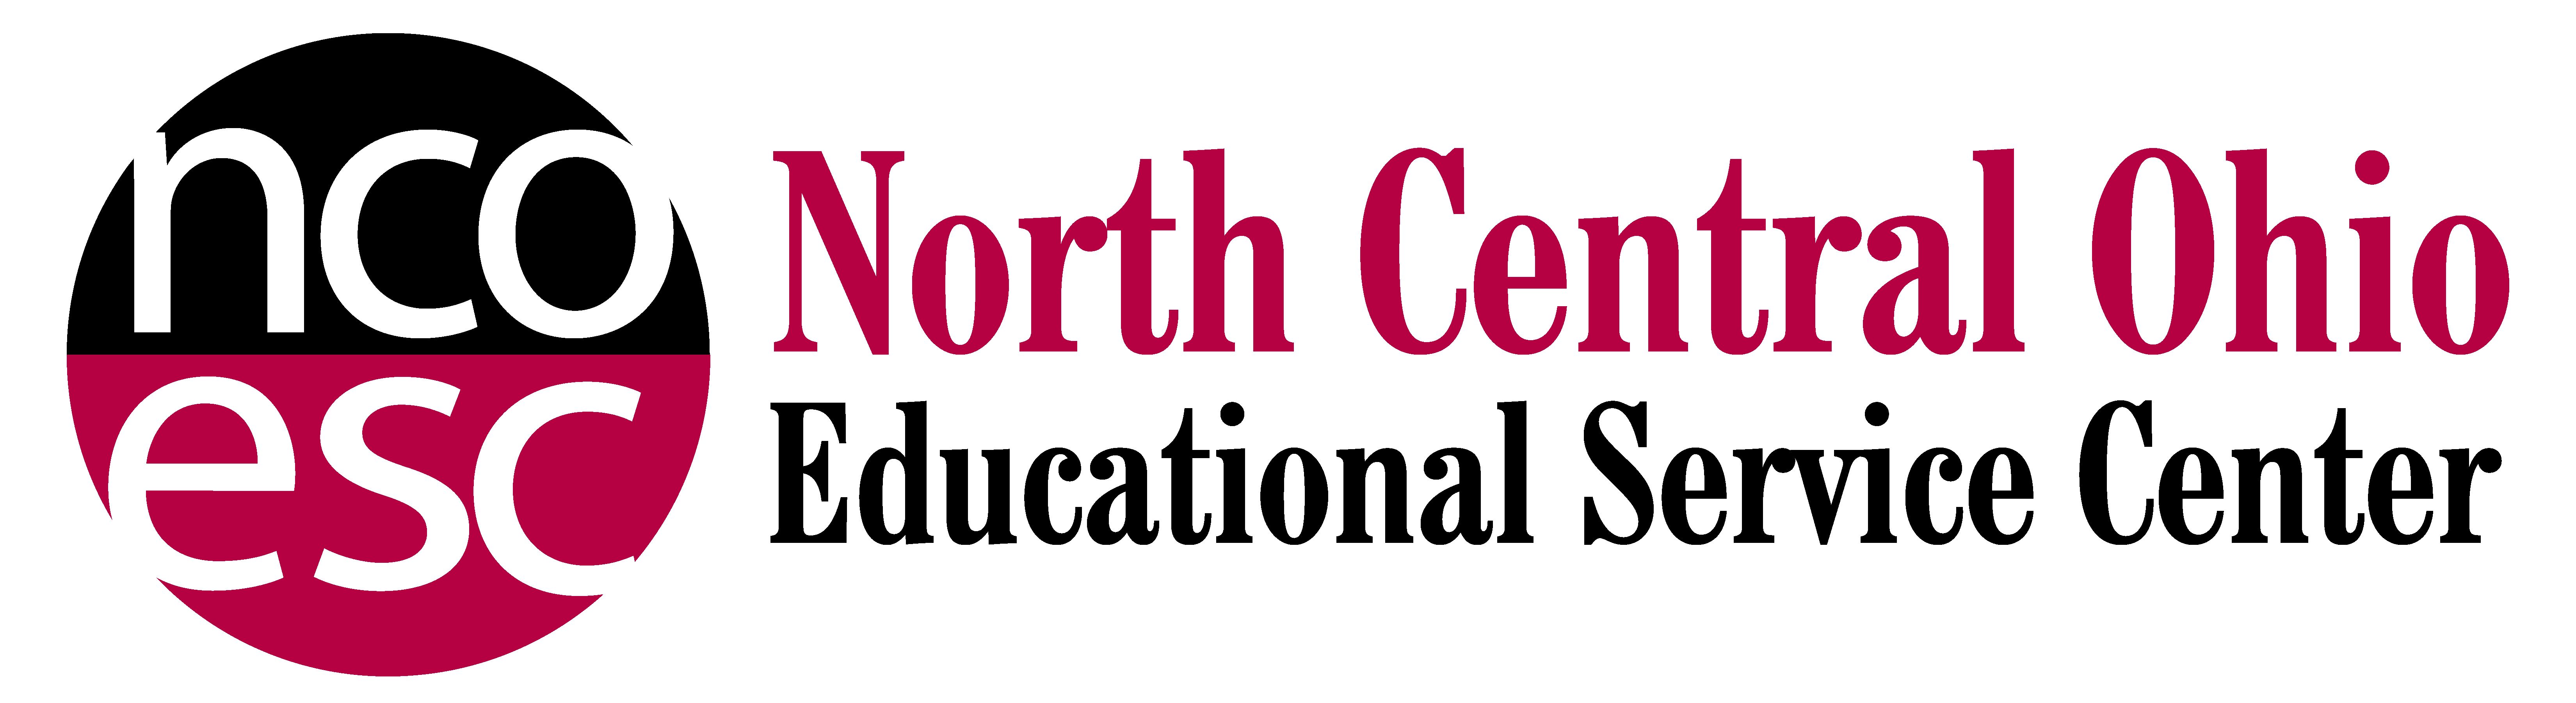 North Central Ohio Educational Service Center Energy 